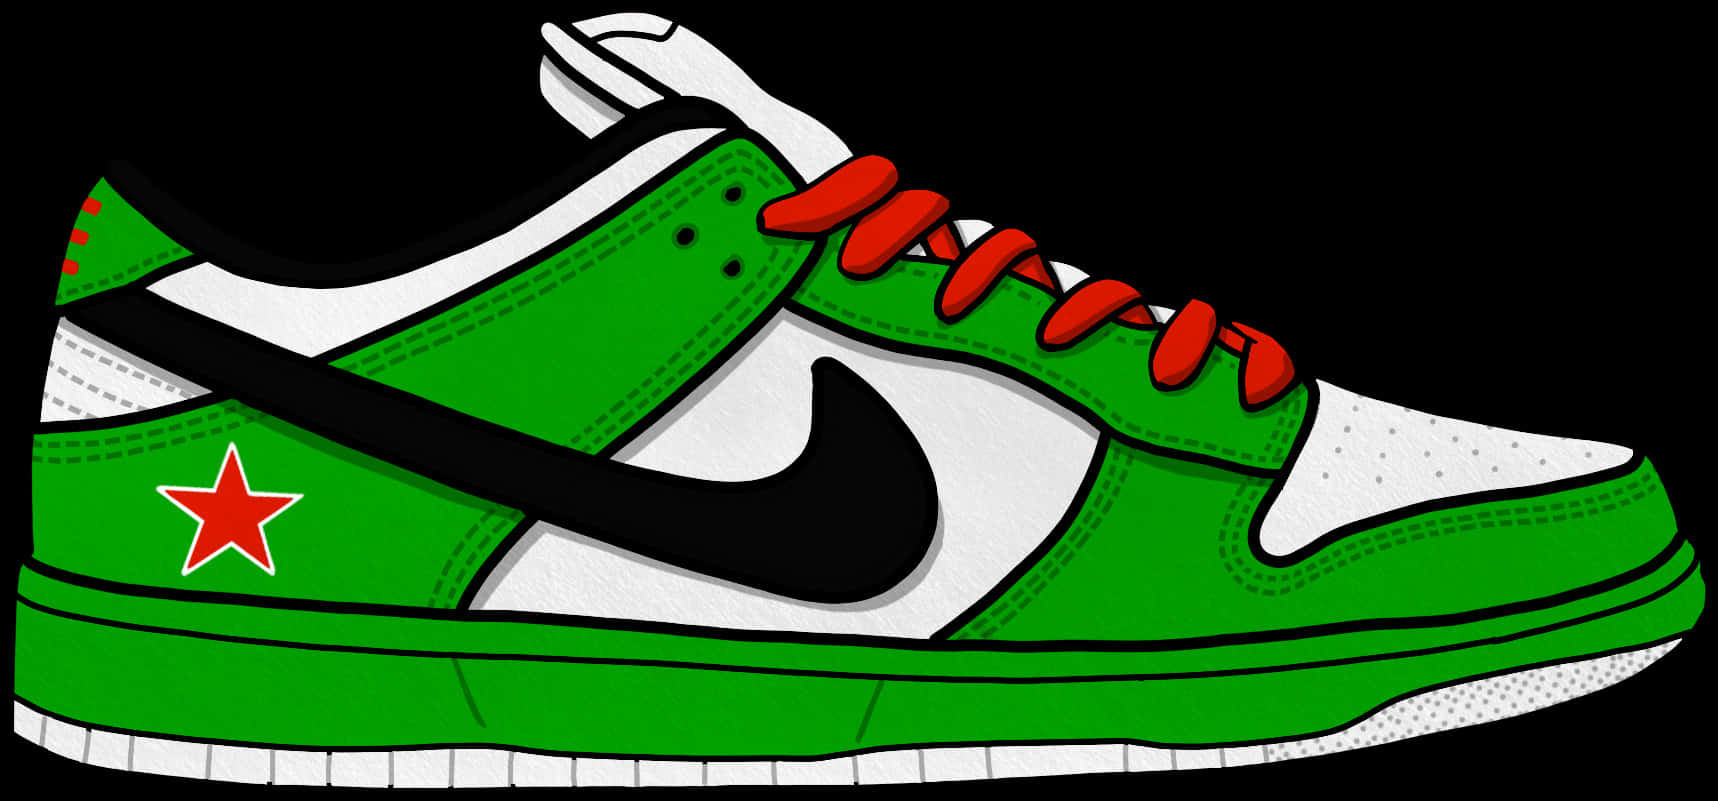 A Green And White Shoe With Red Laces